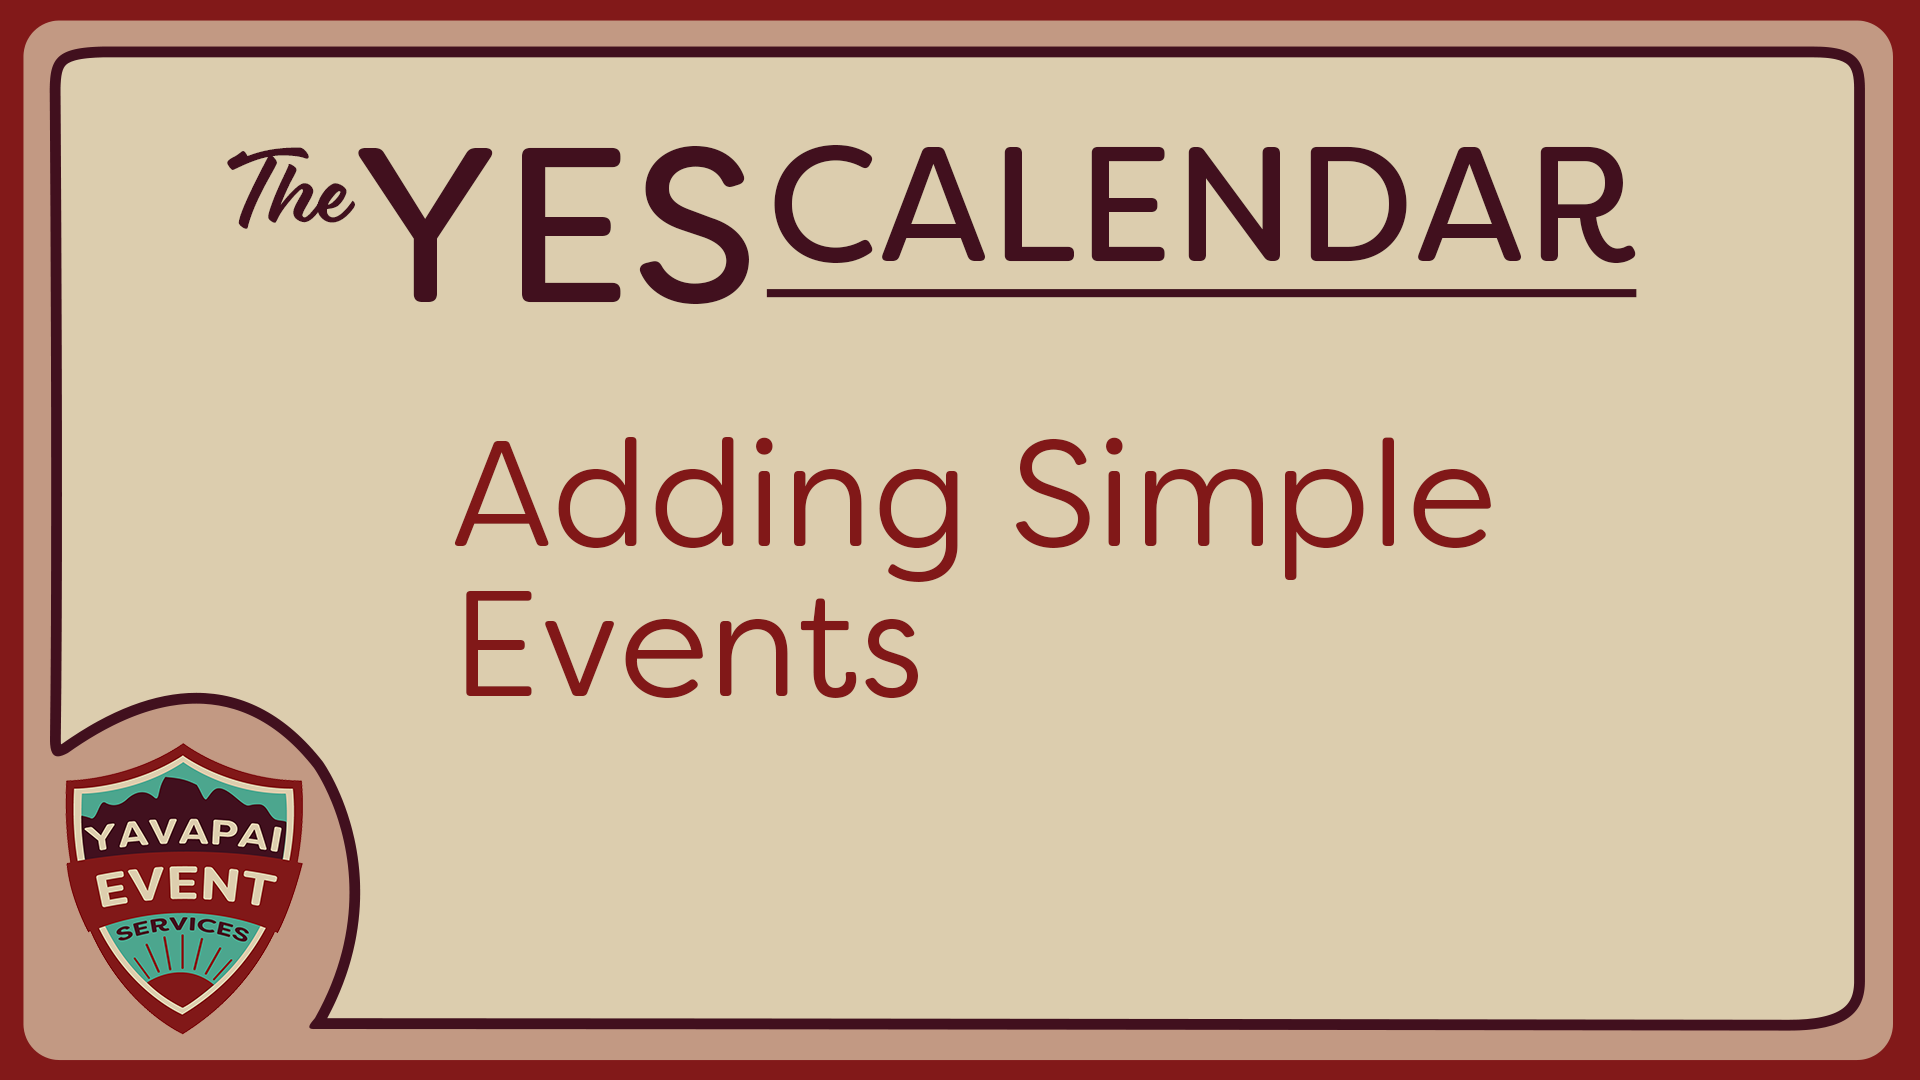 Adding Simple Events